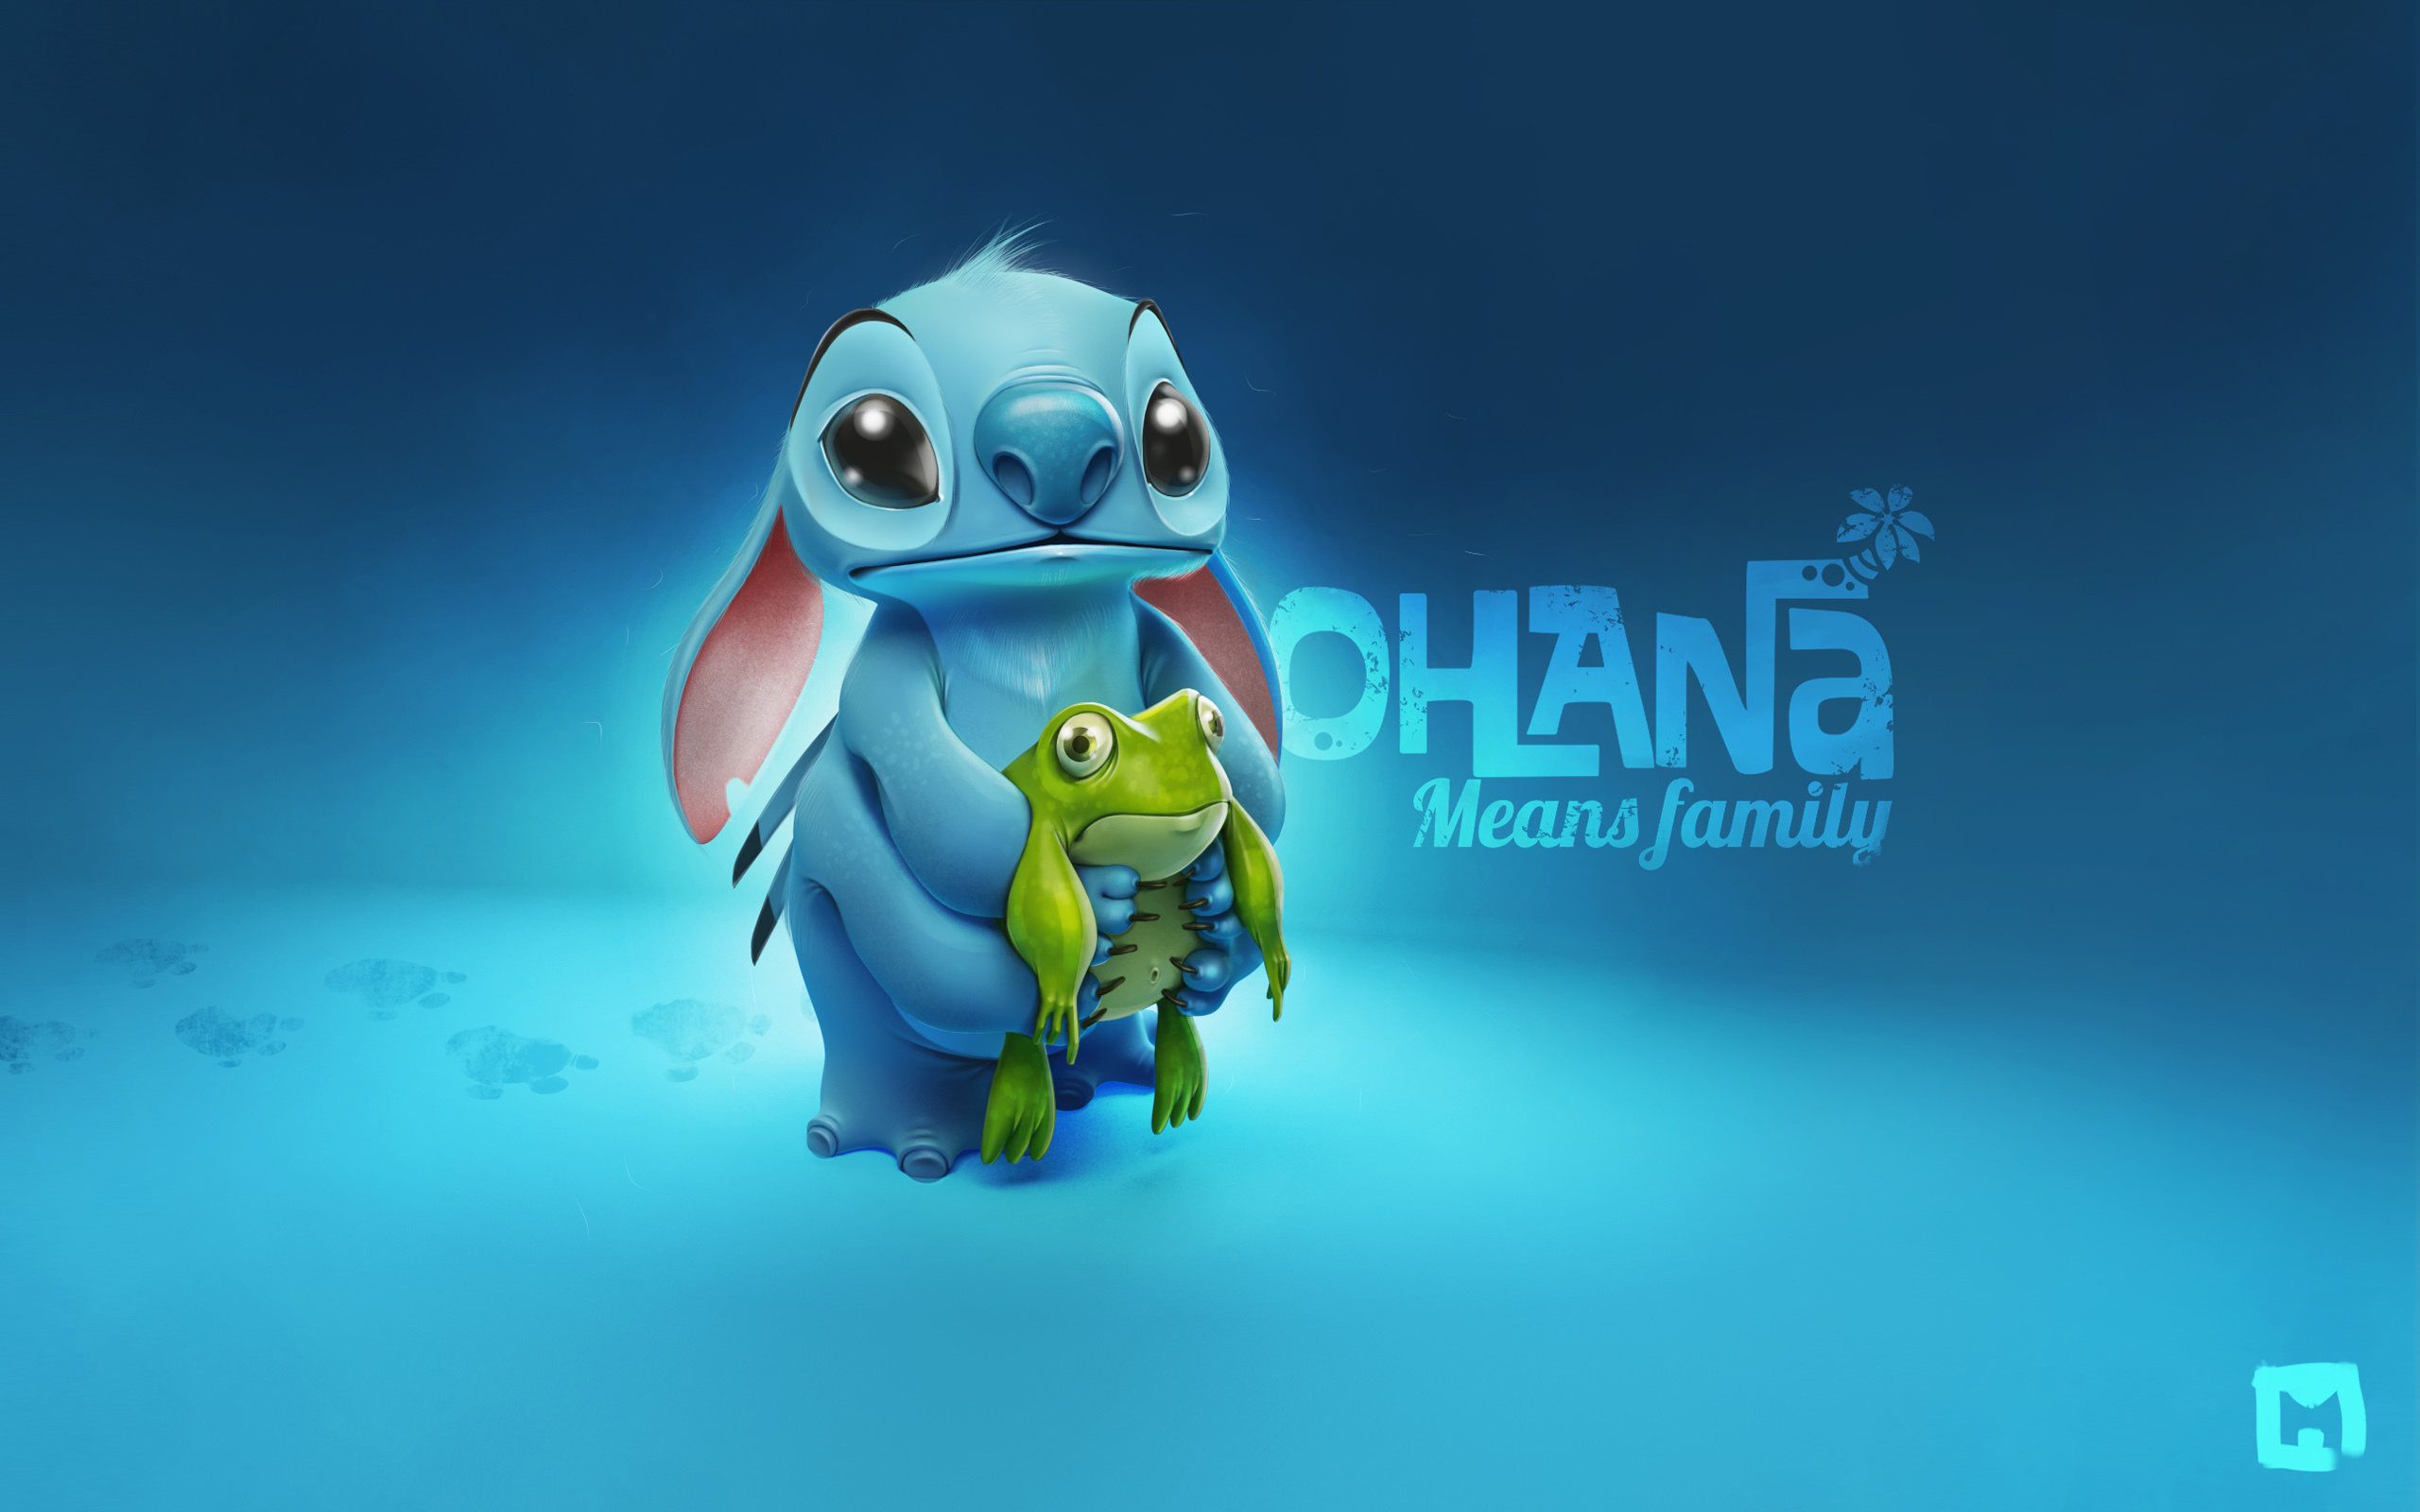 Wallpapers lilo and stitch cartoon heroes on the desktop